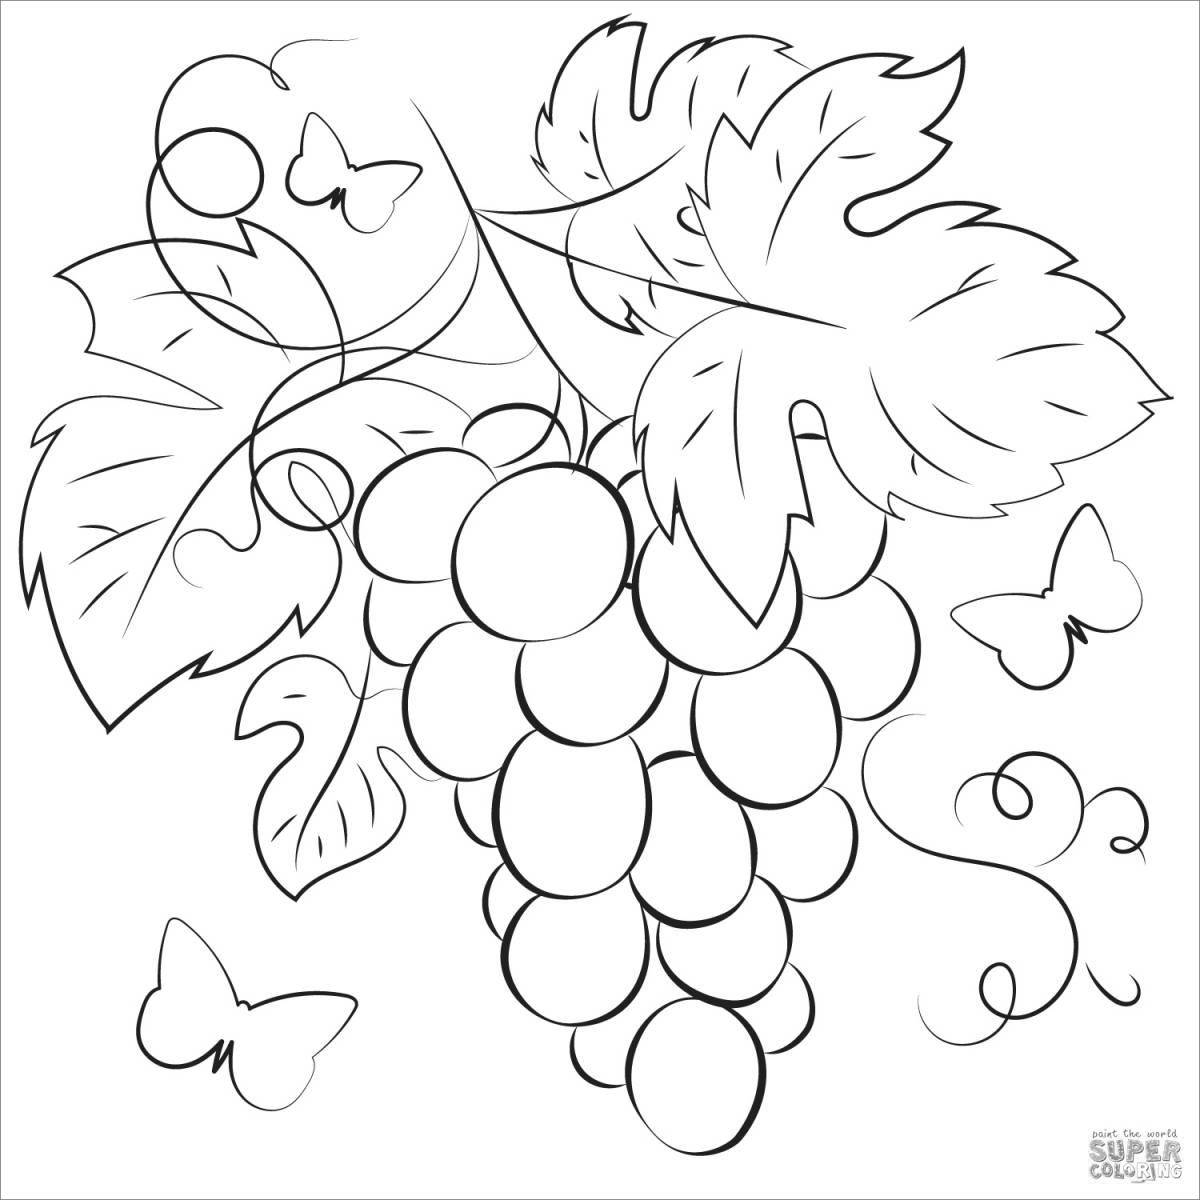 Adorable grape coloring page for 3-4 year olds